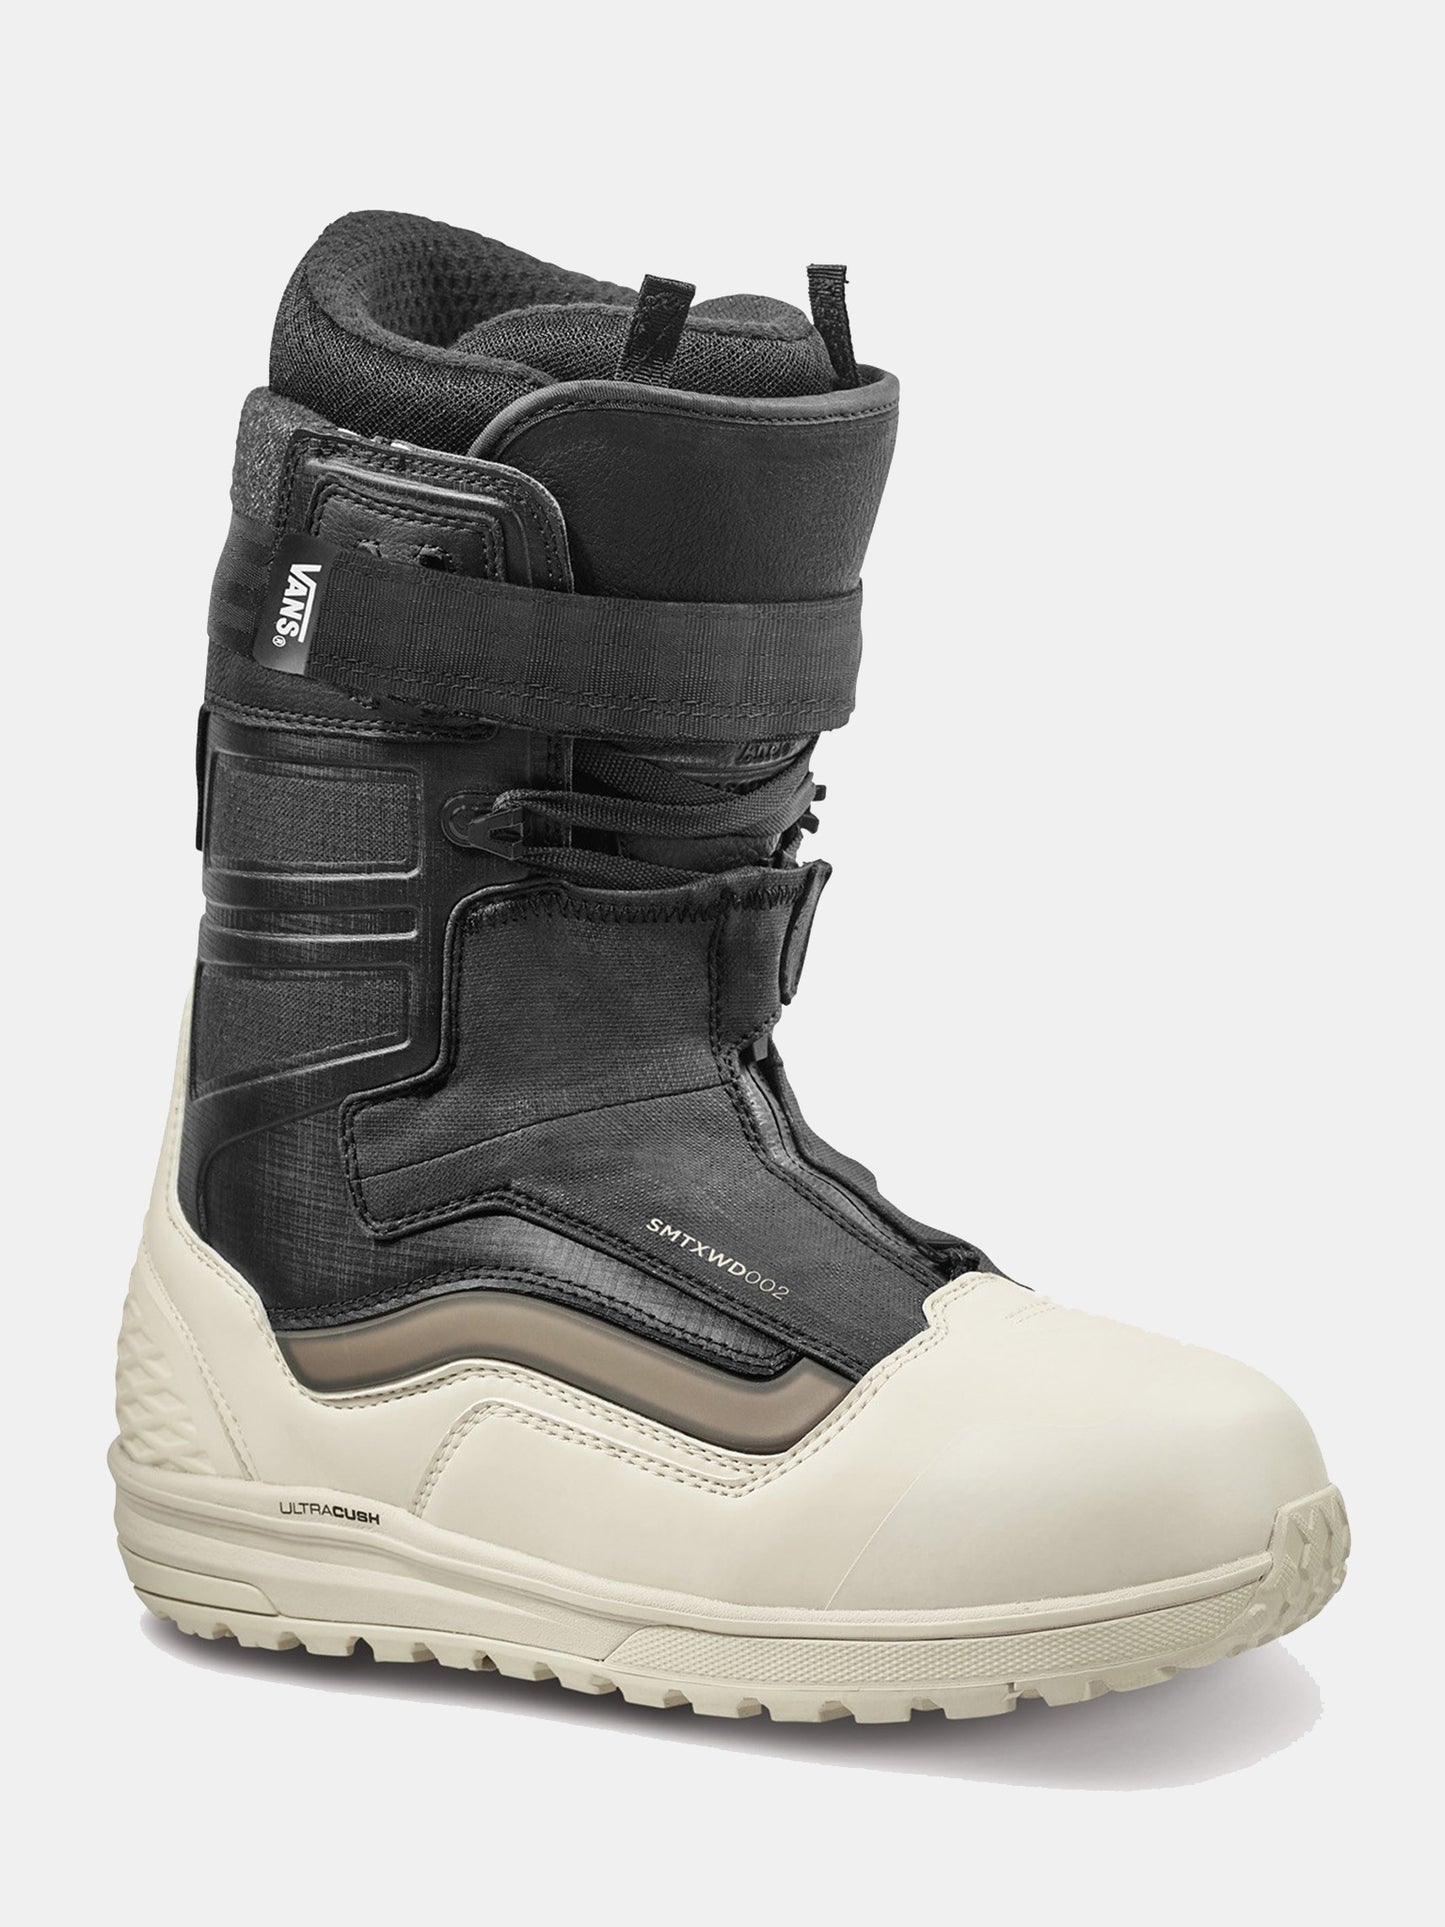 Vans Hi-Country and Hell Bound Snowboard Boots 2022